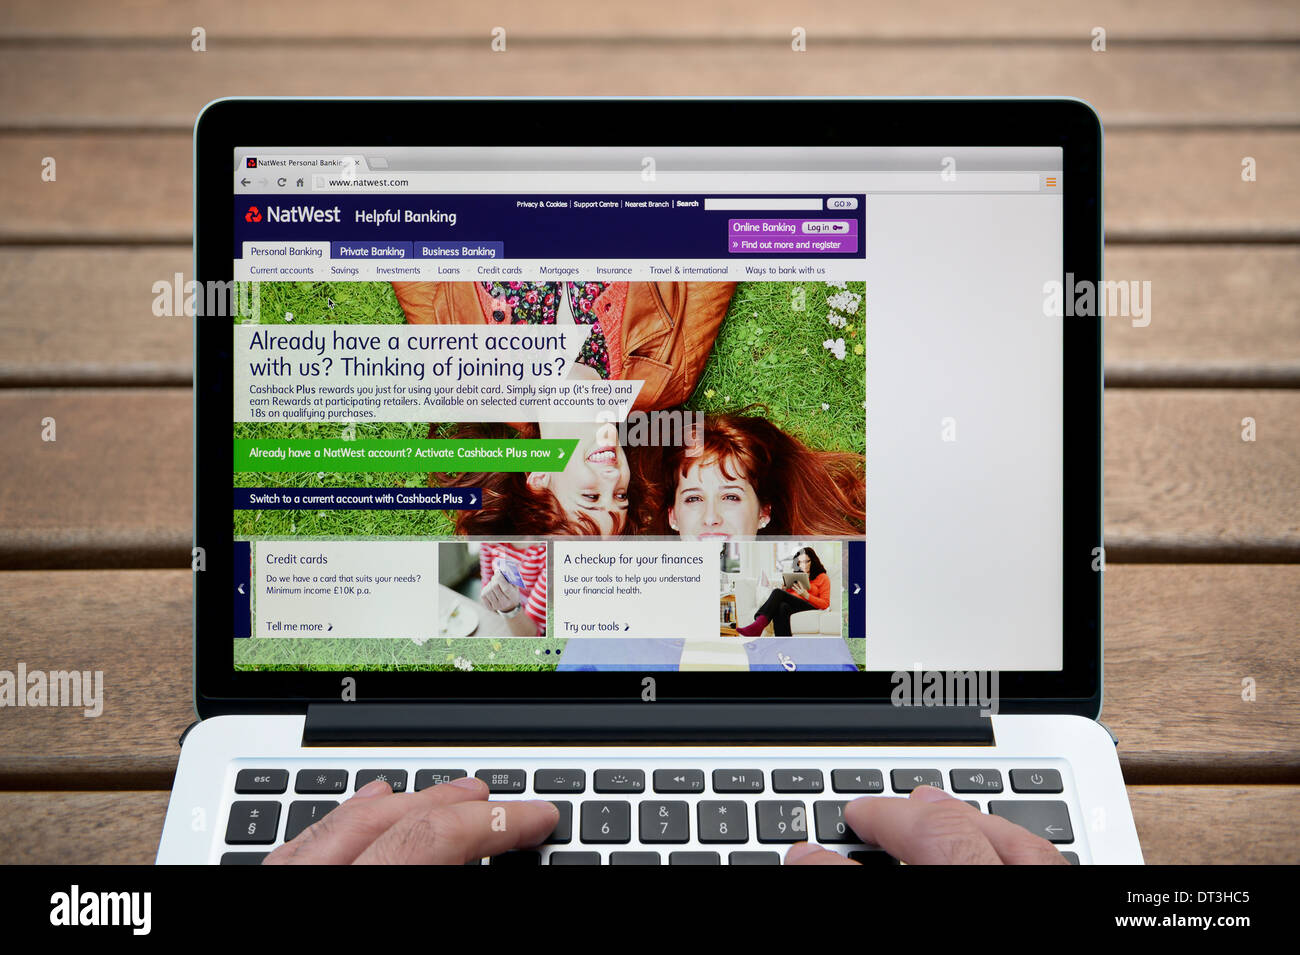 The Natwest website on a MacBook against a wooden bench outdoor background including a man's fingers (Editorial use only). Stock Photo